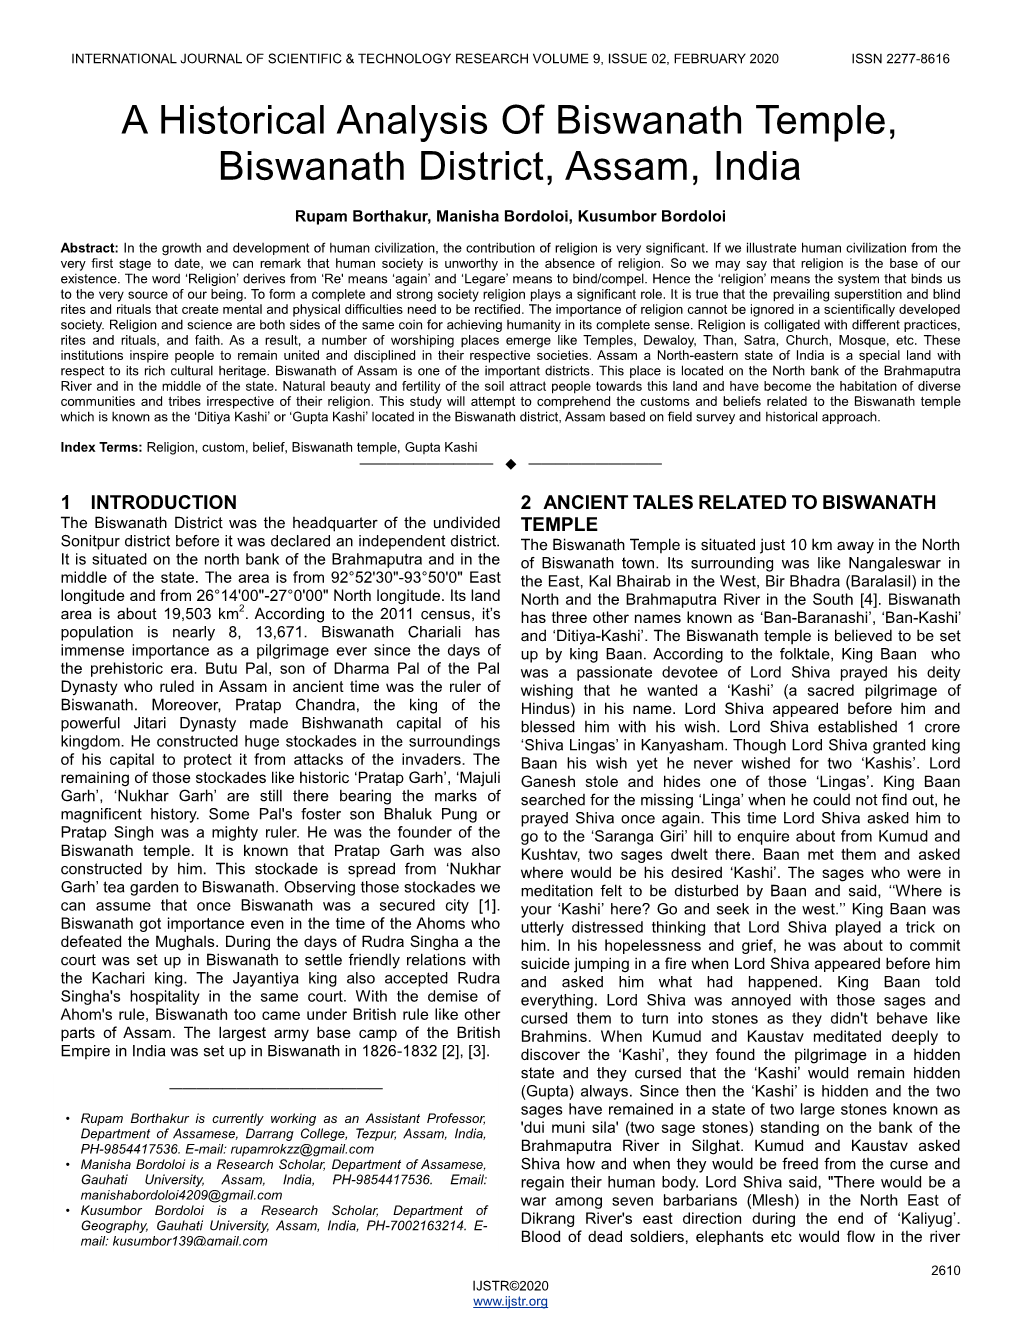 A Historical Analysis of Biswanath Temple, Biswanath District, Assam, India